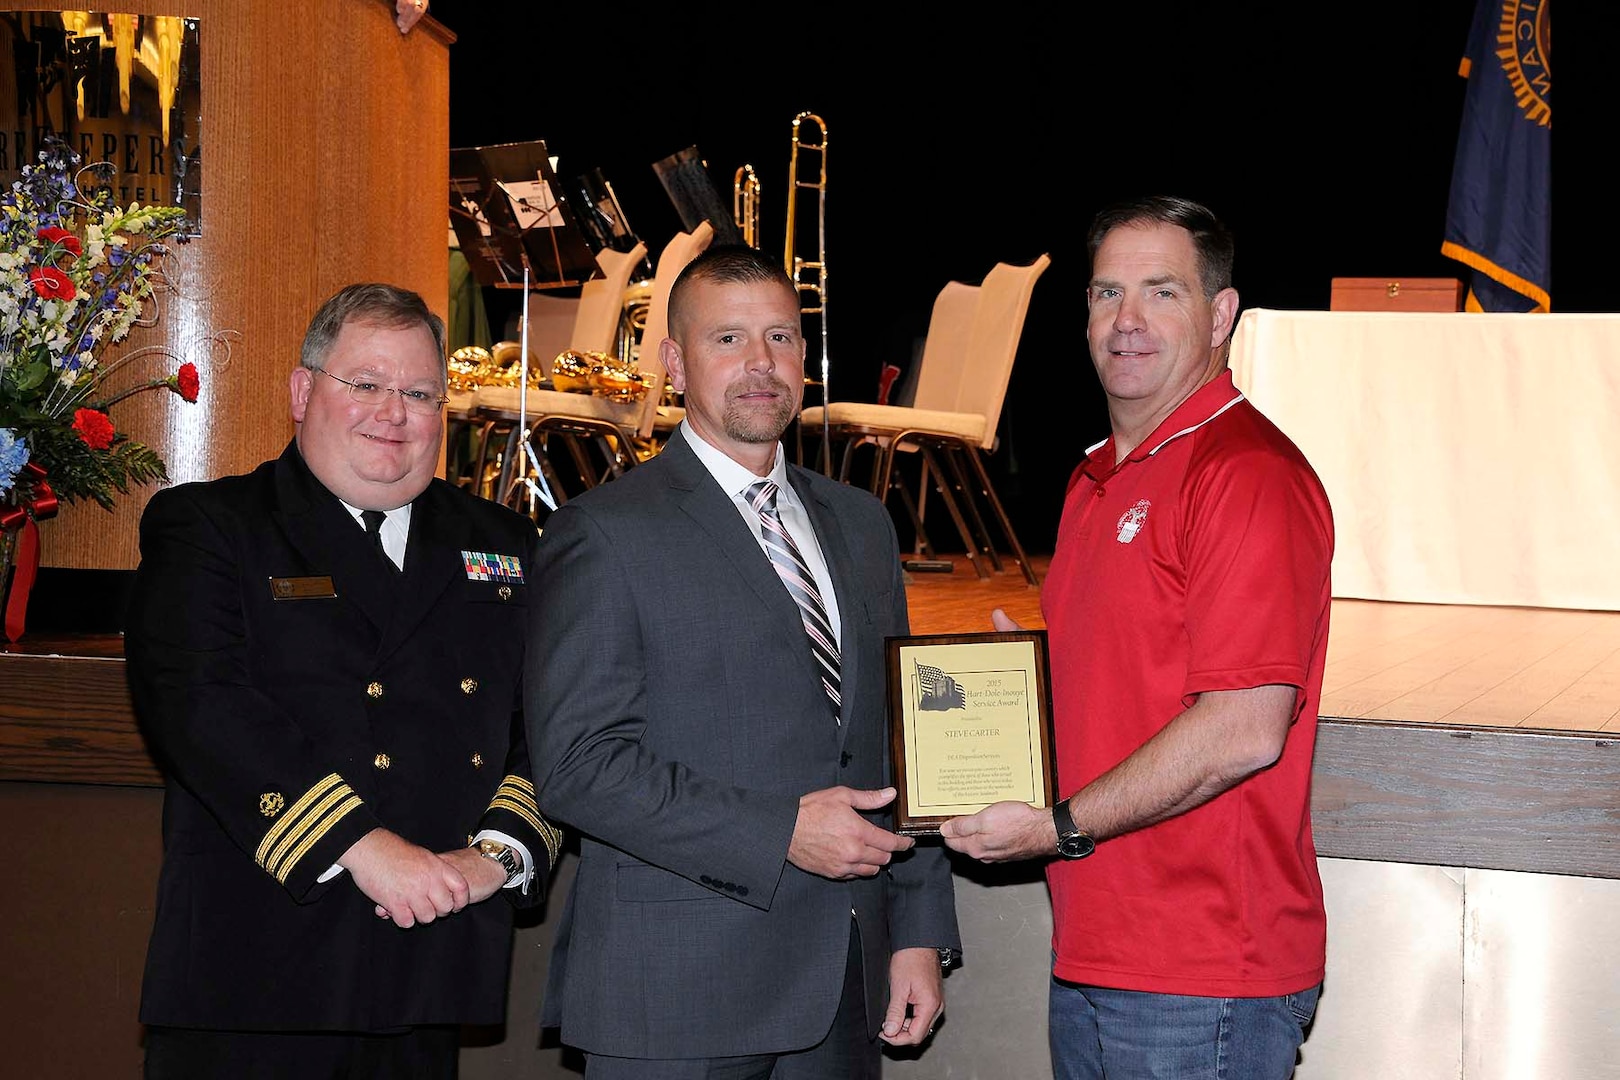 Steve Carter (center) receives the Hart-Dole-Inouye Federal Center Service Award from DLA Disposition Services Director Mike Cannon (right) and Retired Navy Cmdr. T.R. Shaw for demonstrating the “spirit of service” synonymous with the center and its namesakes.